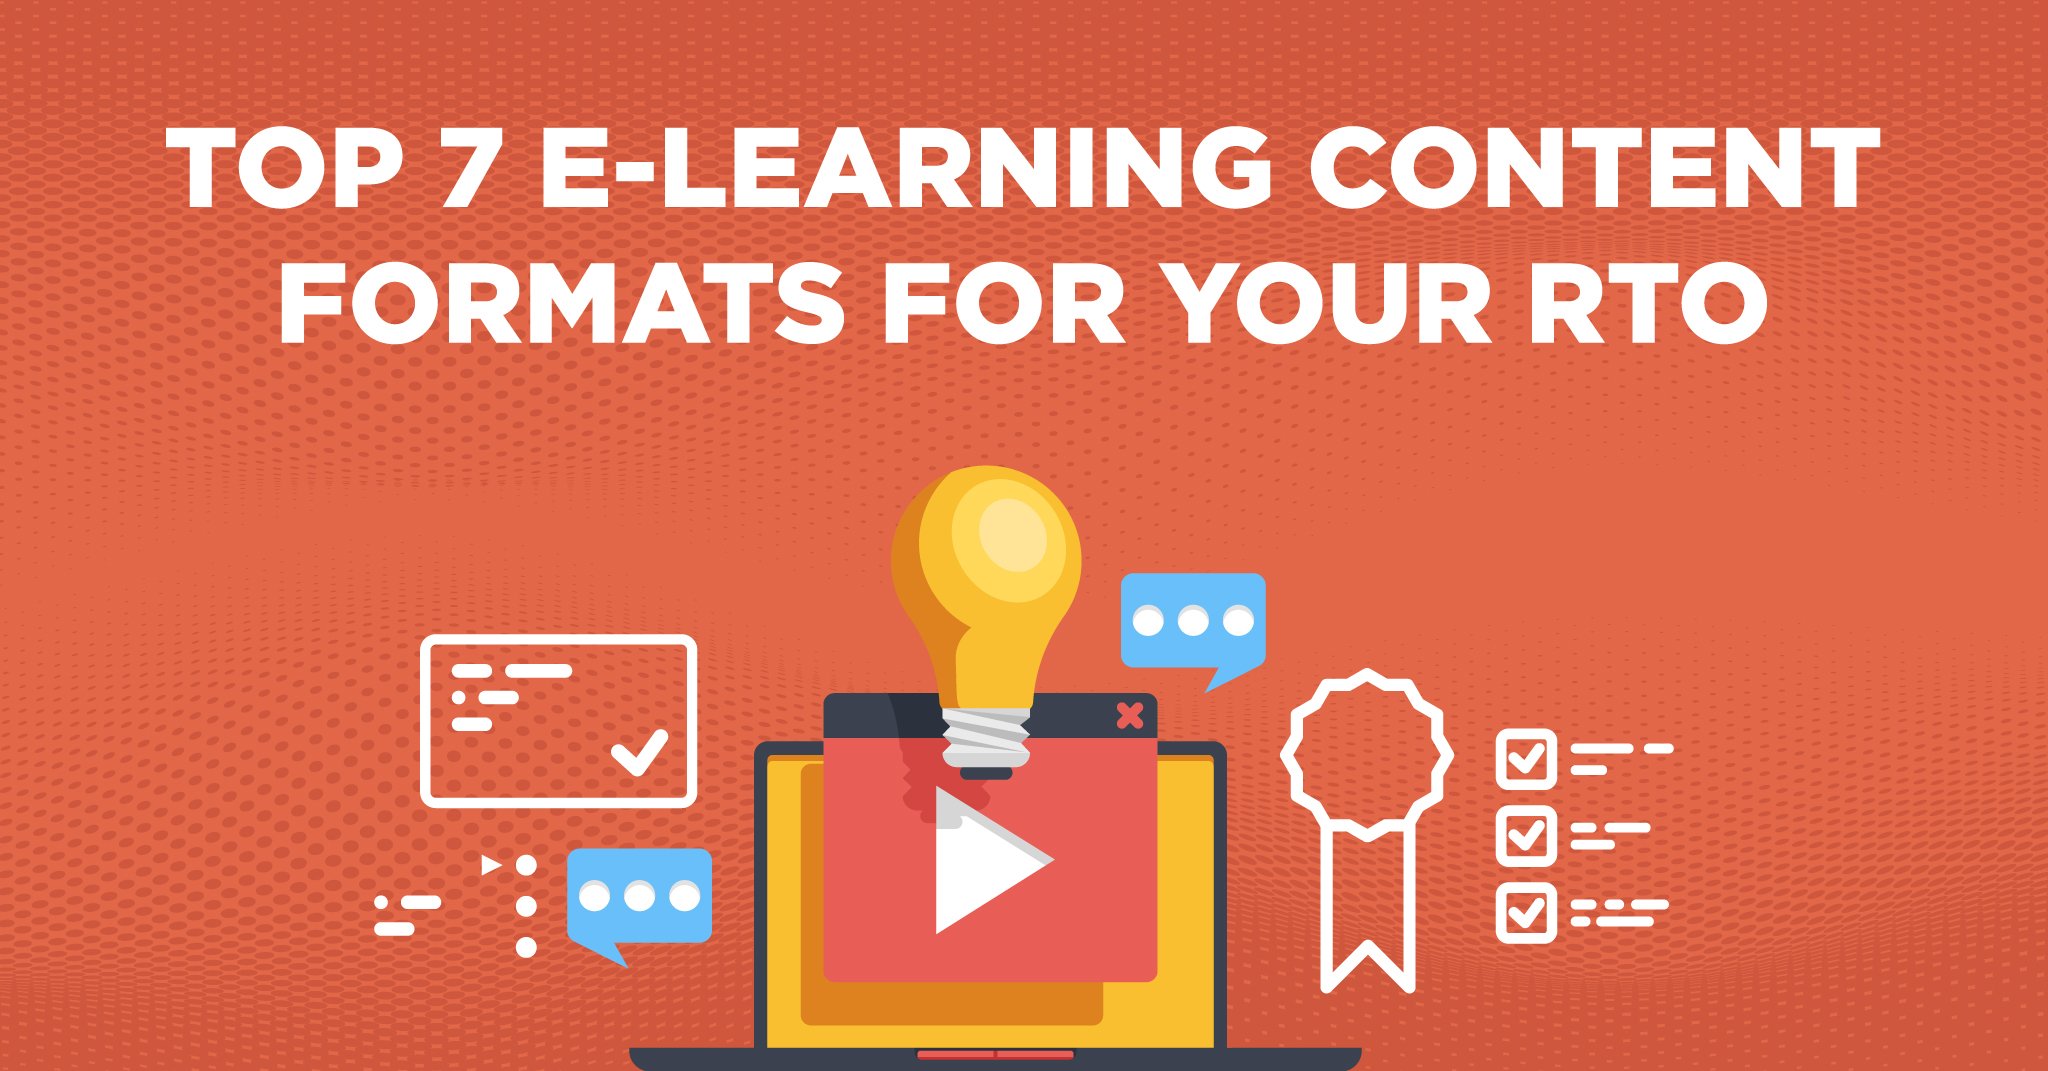 Best e-Learning Formats for Your RTO